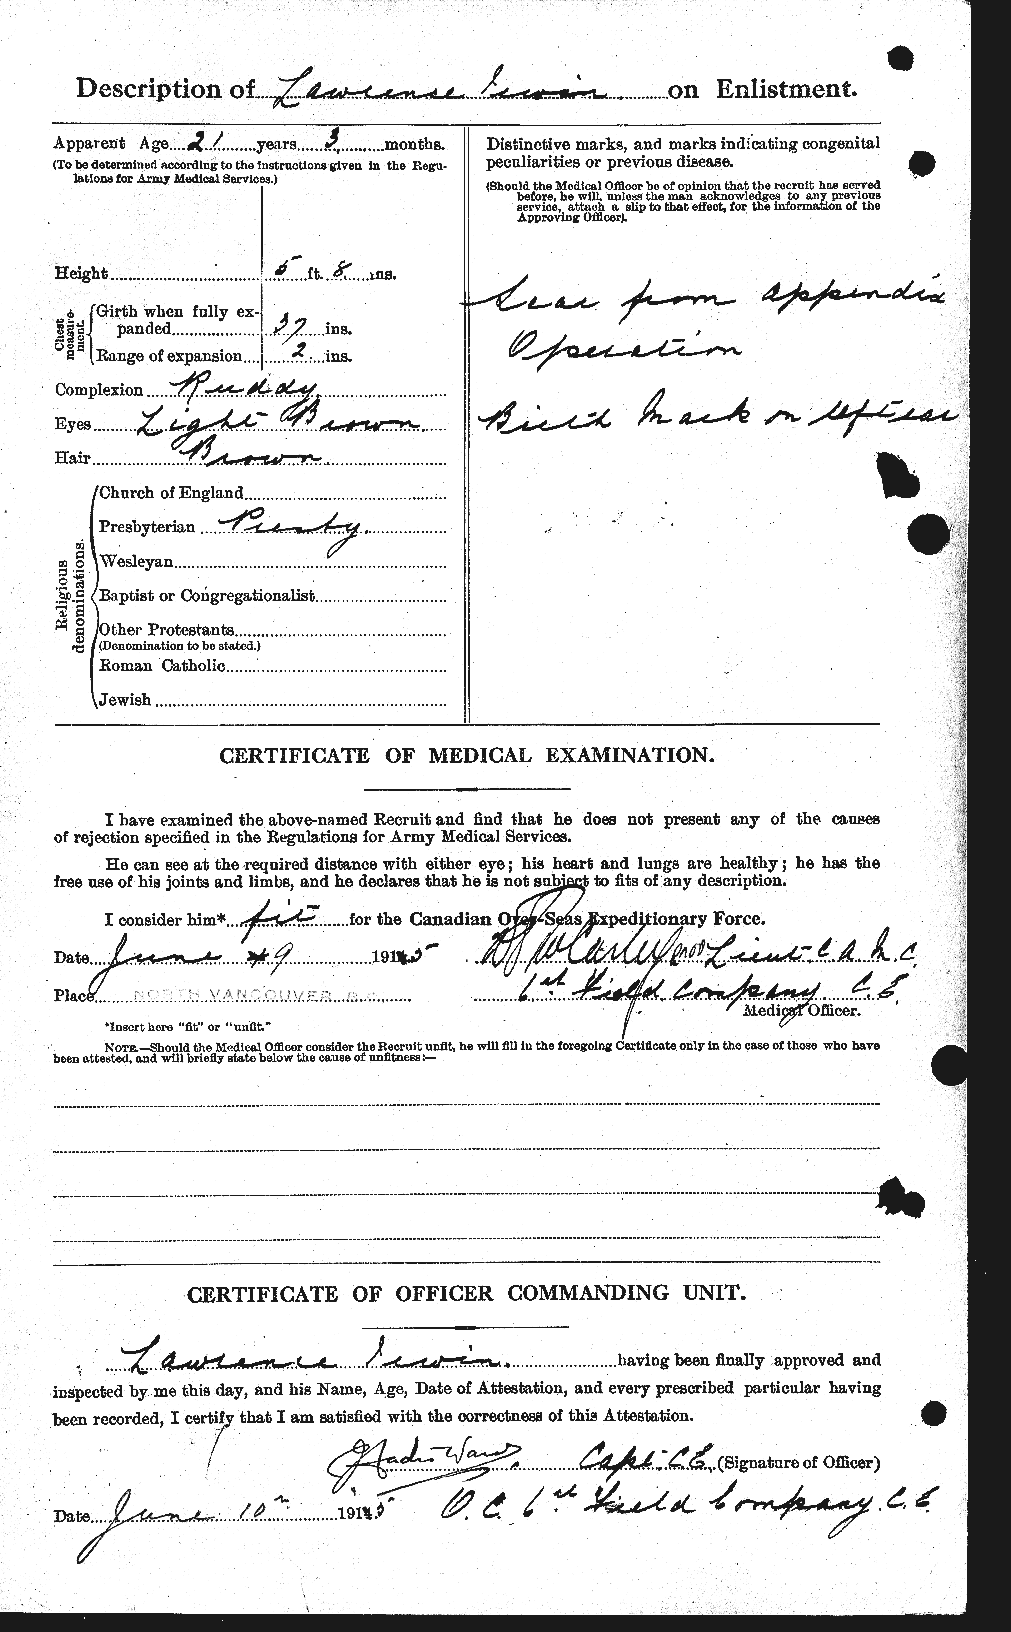 Personnel Records of the First World War - CEF 412950b